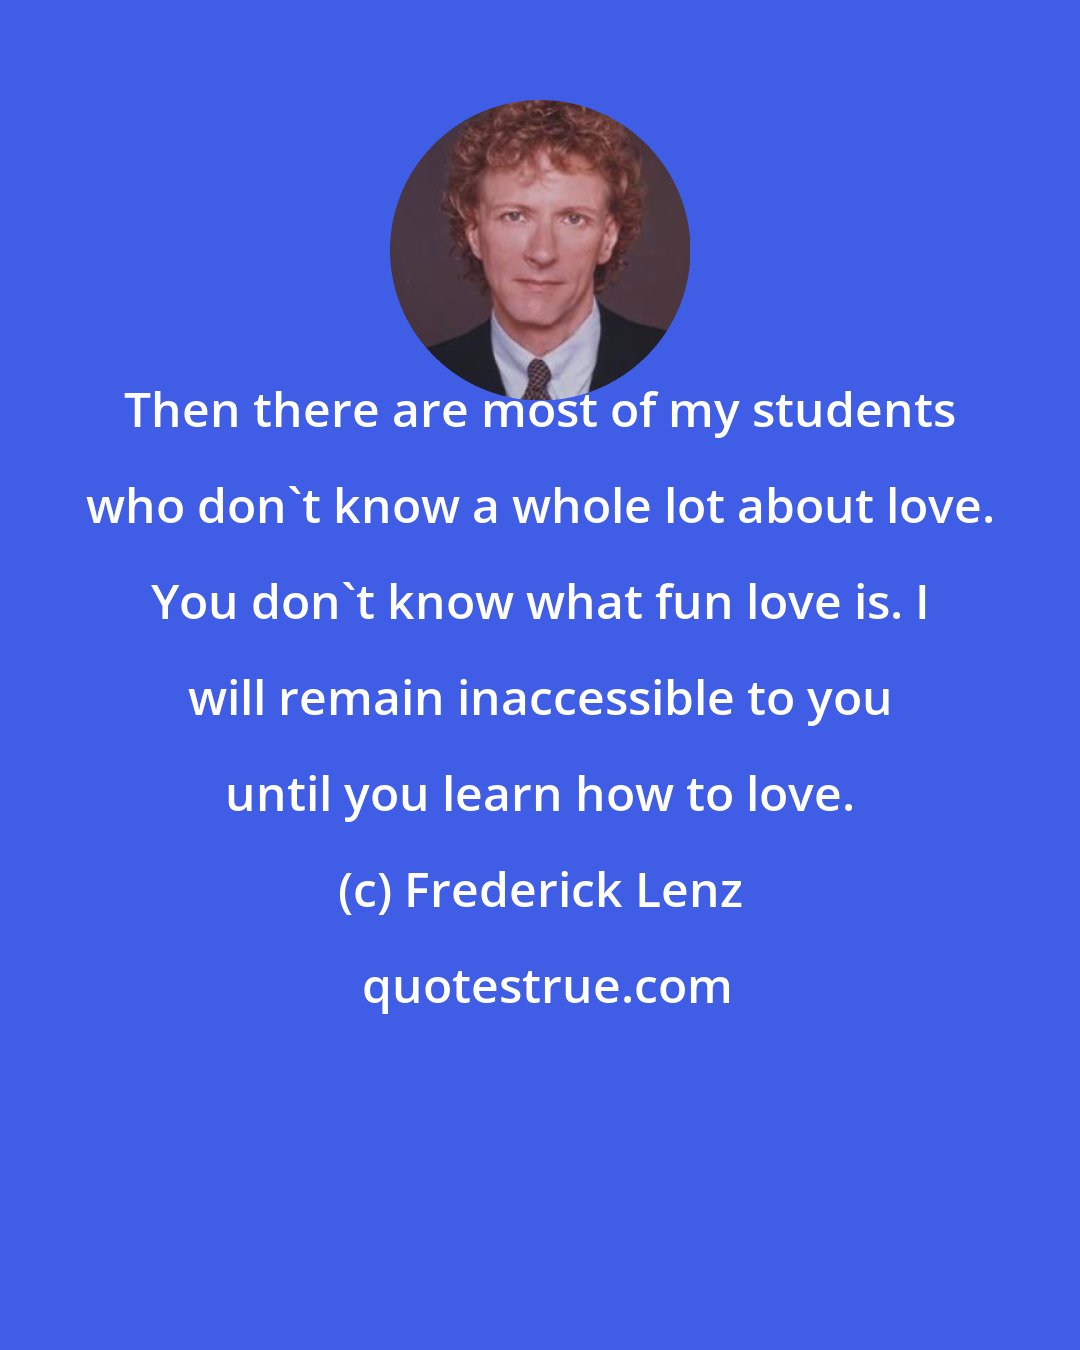 Frederick Lenz: Then there are most of my students who don't know a whole lot about love. You don't know what fun love is. I will remain inaccessible to you until you learn how to love.